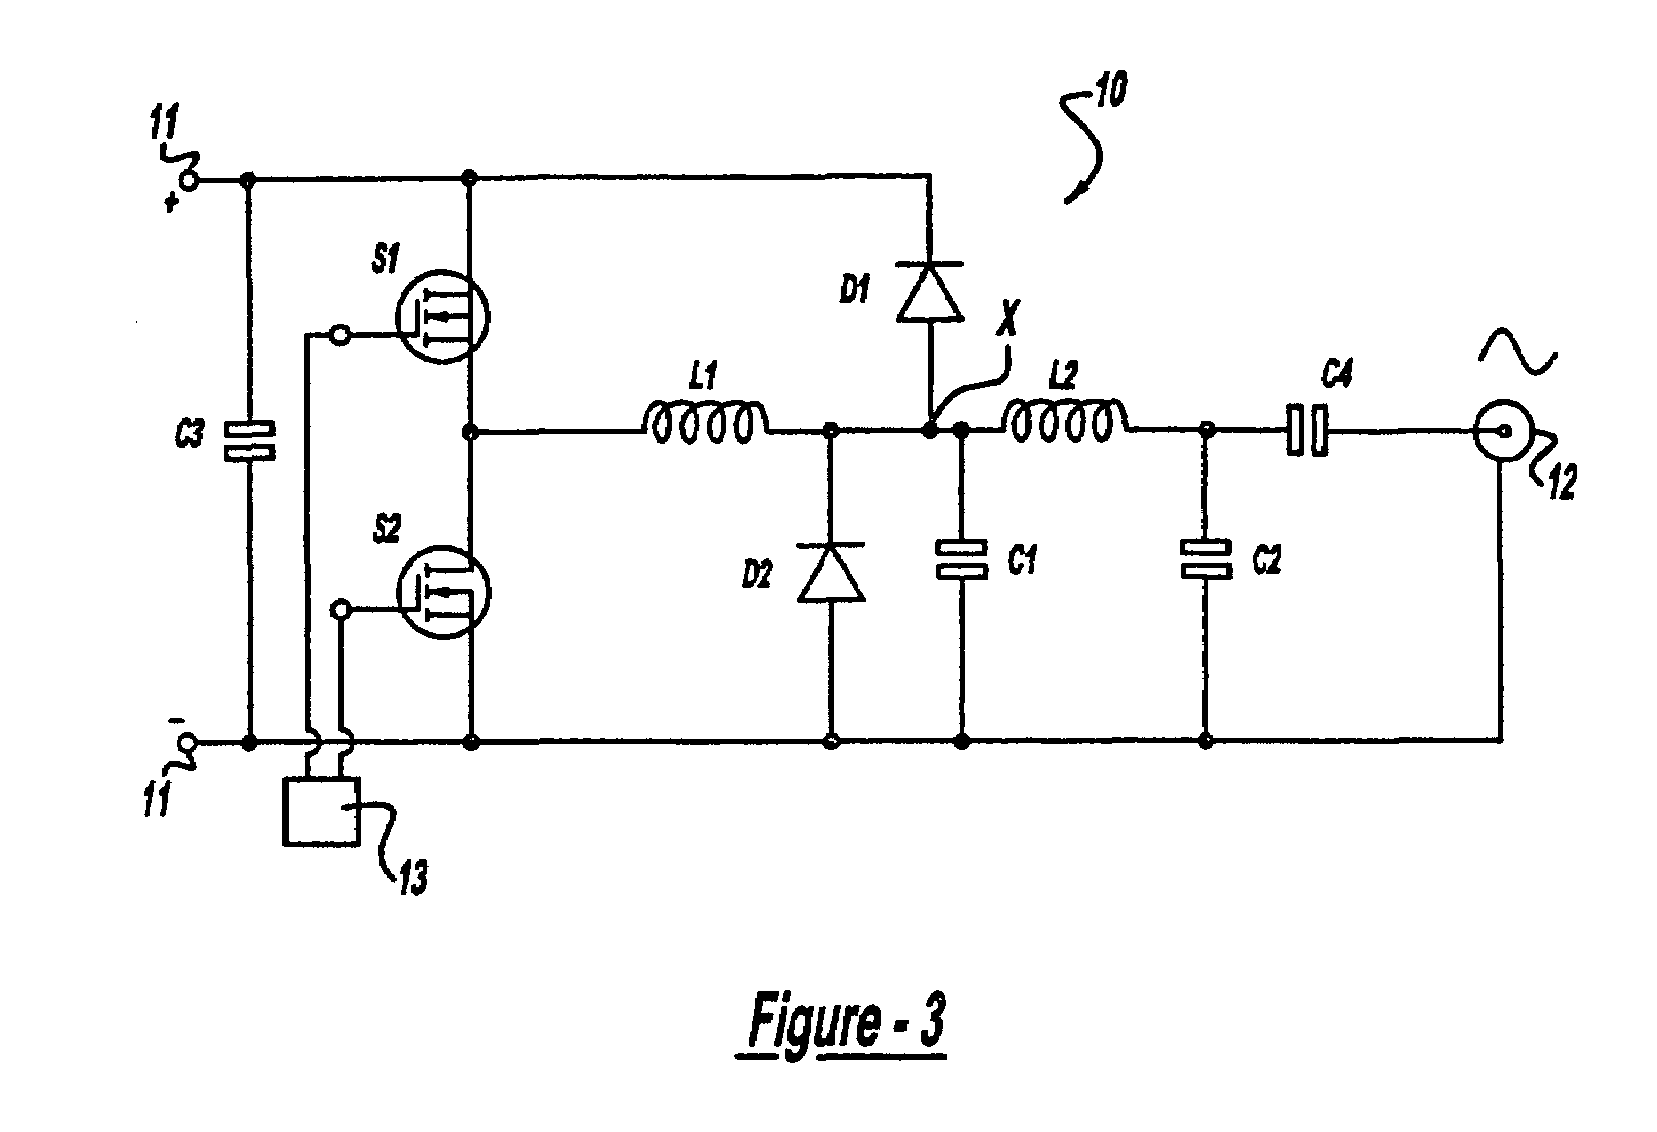 Class E amplifier with inductive clamp